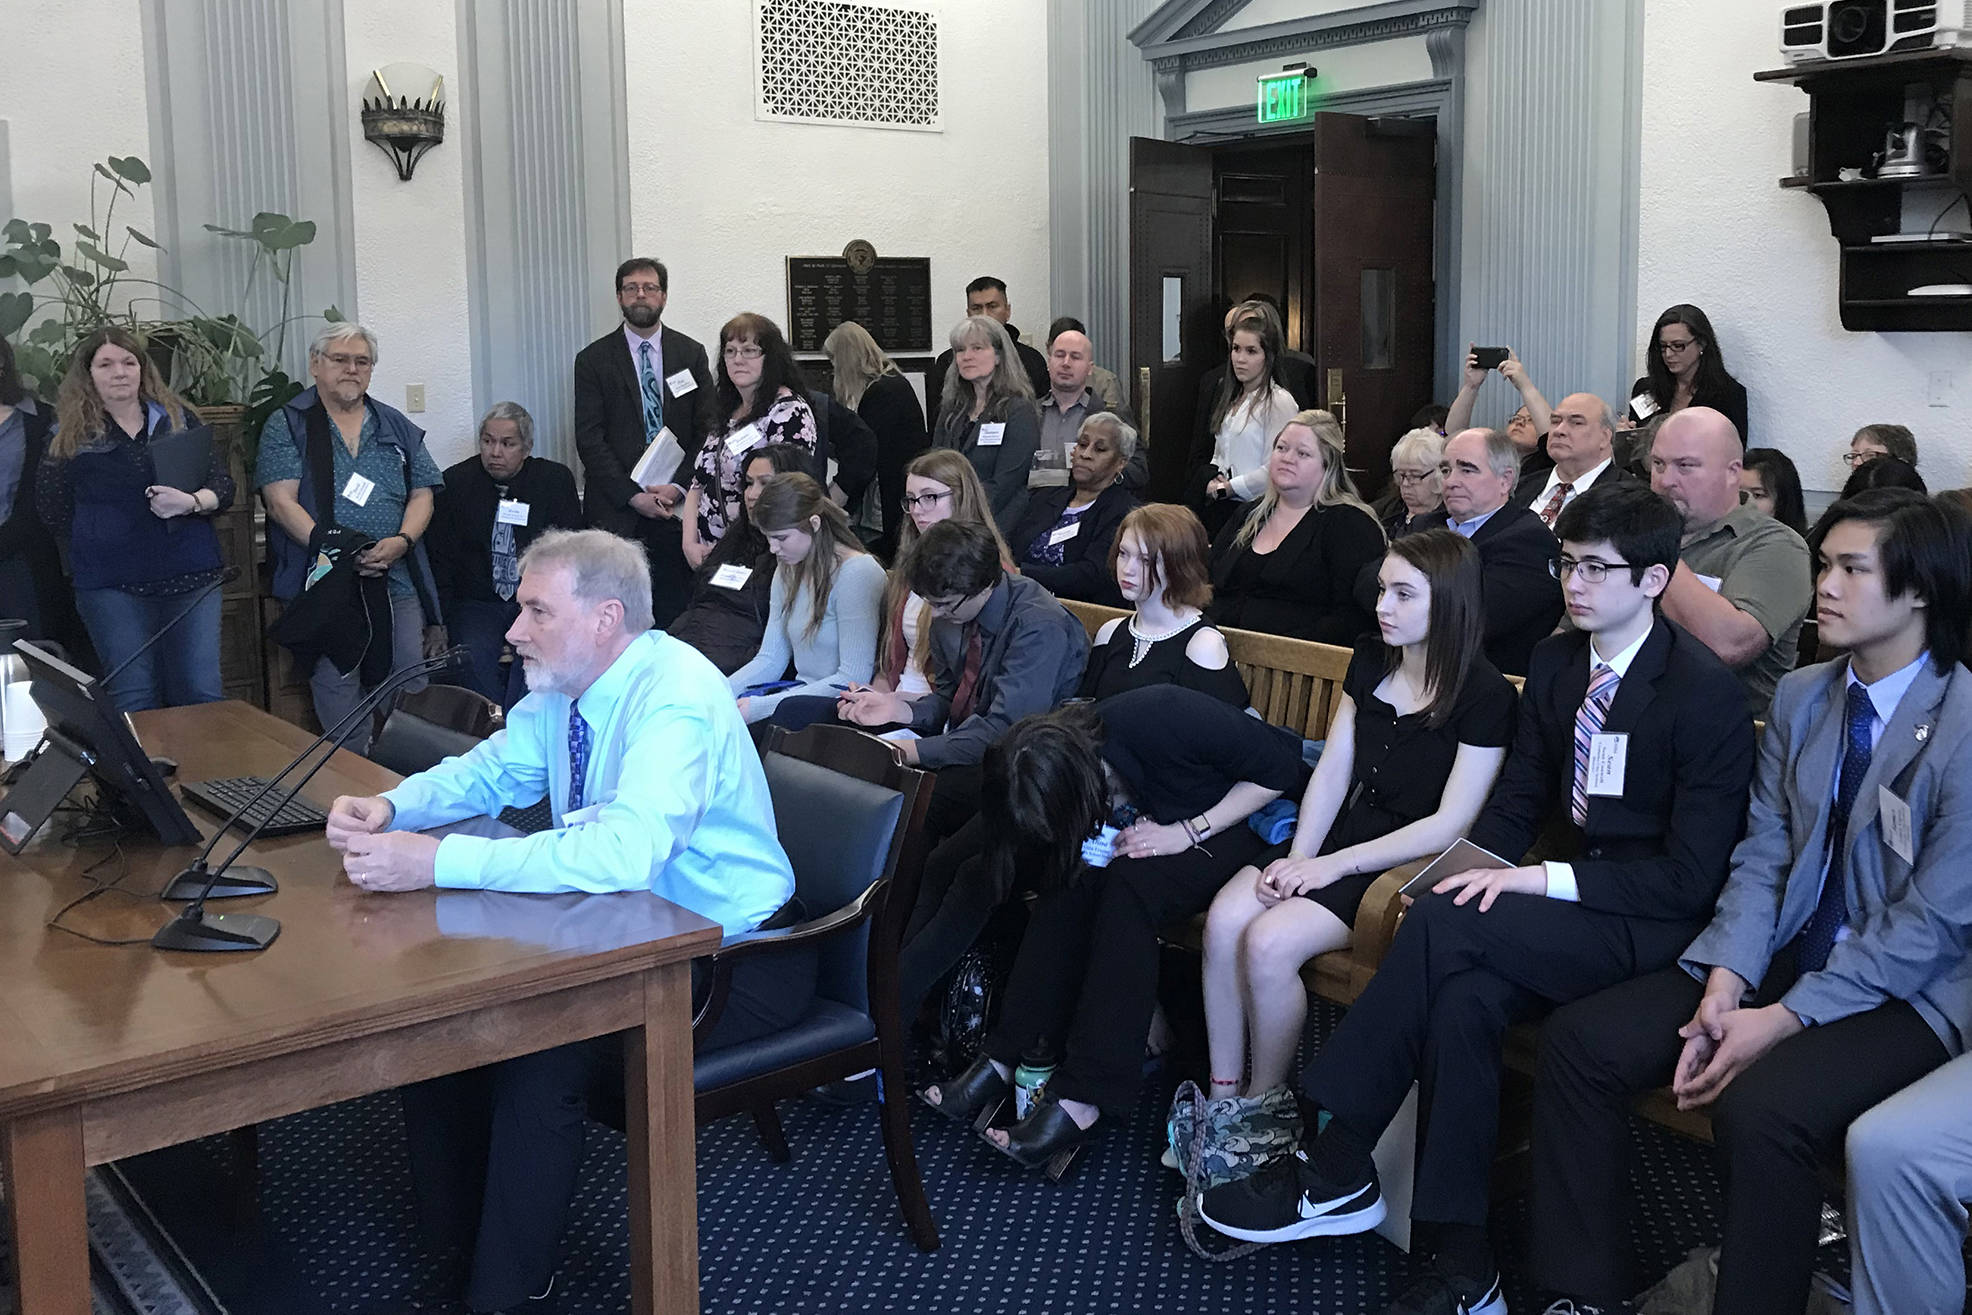 School district representatives from around the state sit in for a Q&A with senators at the Capitol on Monday, Feb. 11, 2019. (Mollie Barnes | Juneau Empire)